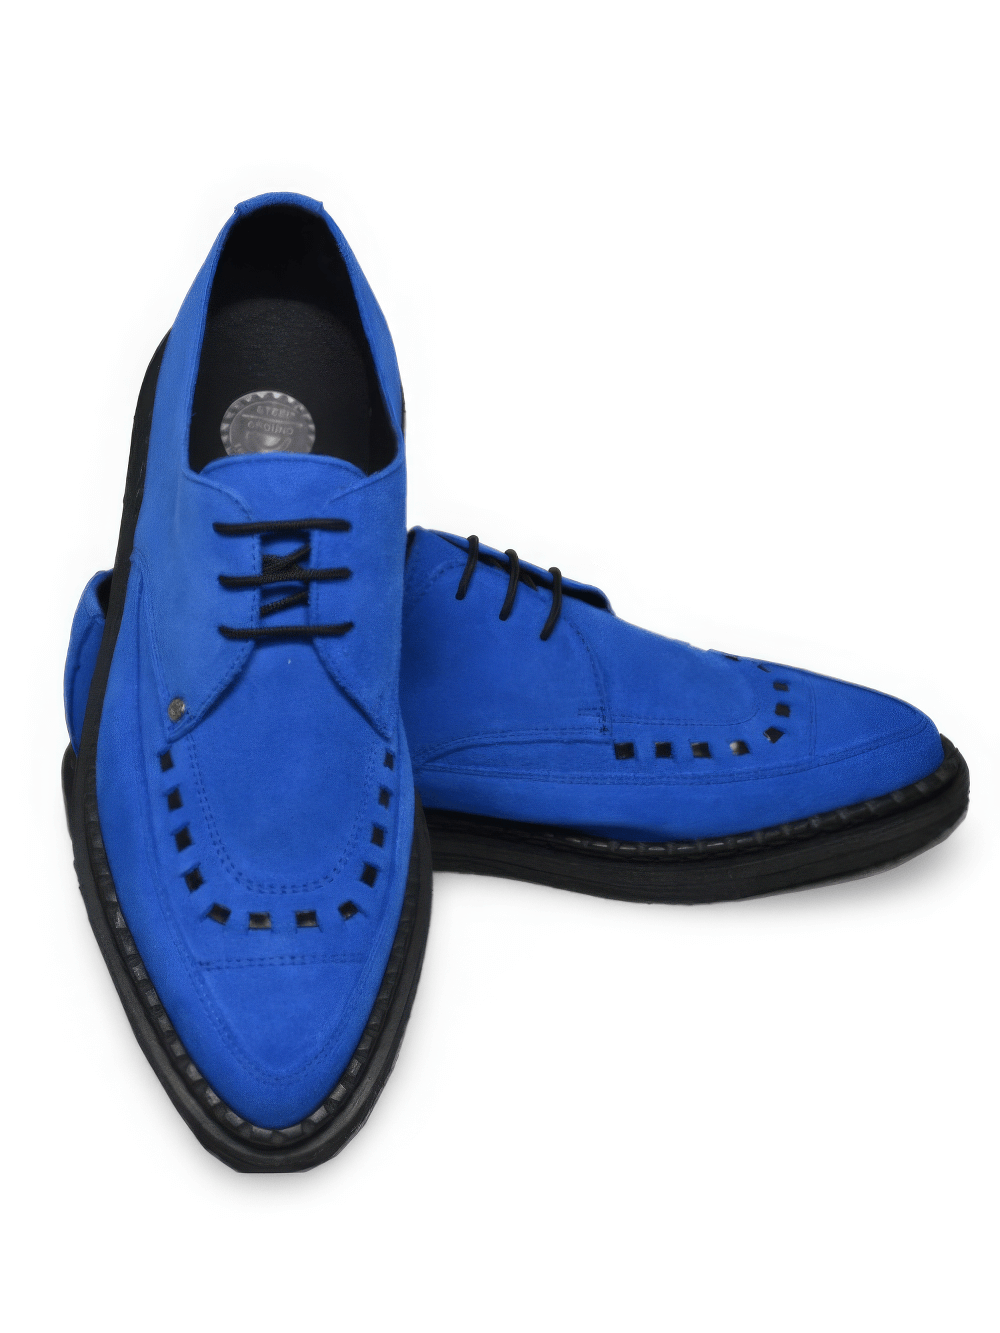 Unisex Blue Suede Pointed Creeper Shoes with Lace-Up Closure